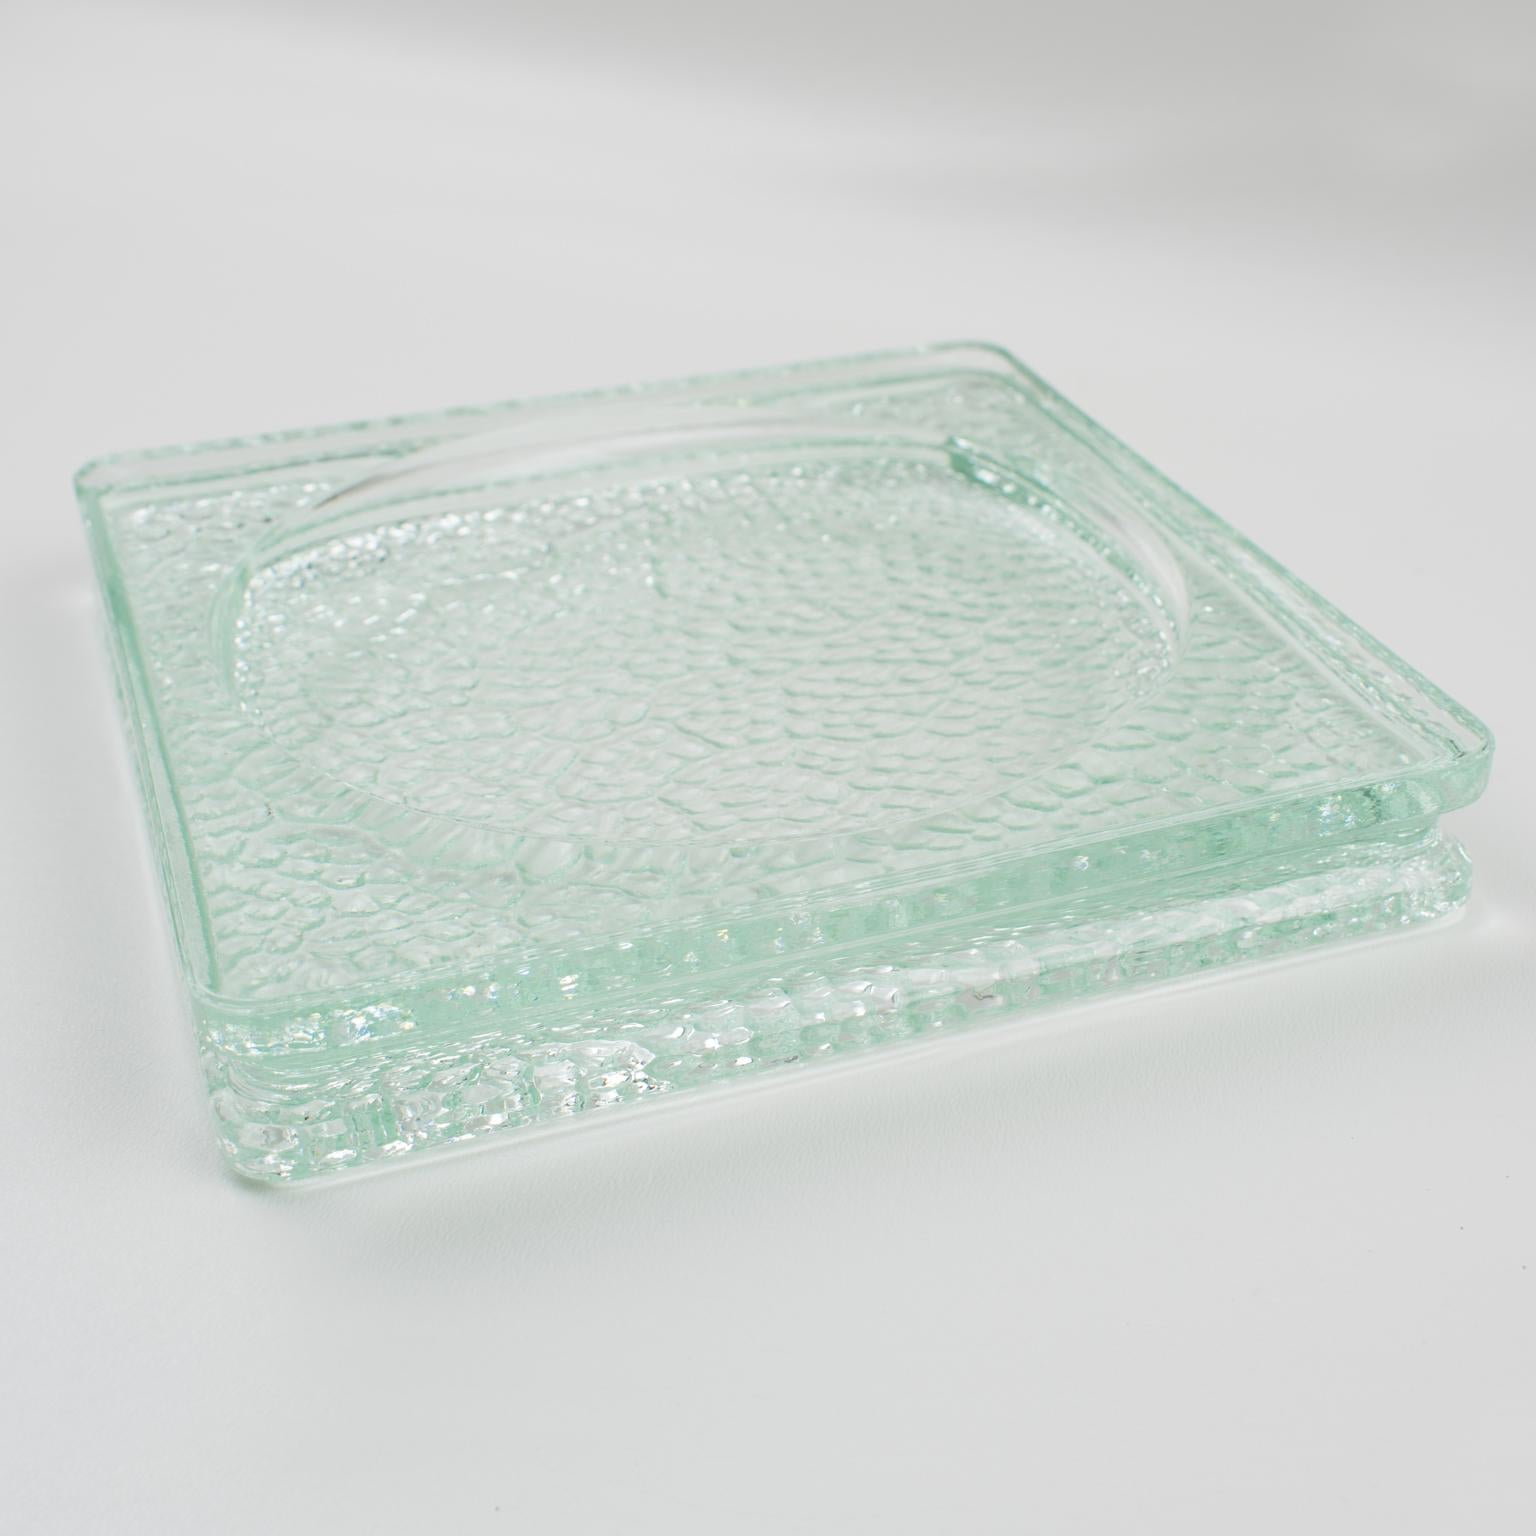 French Designed by Le Corbusier for Lumax 1950s Nevada Molded Glass Desk Tidy Ashtray